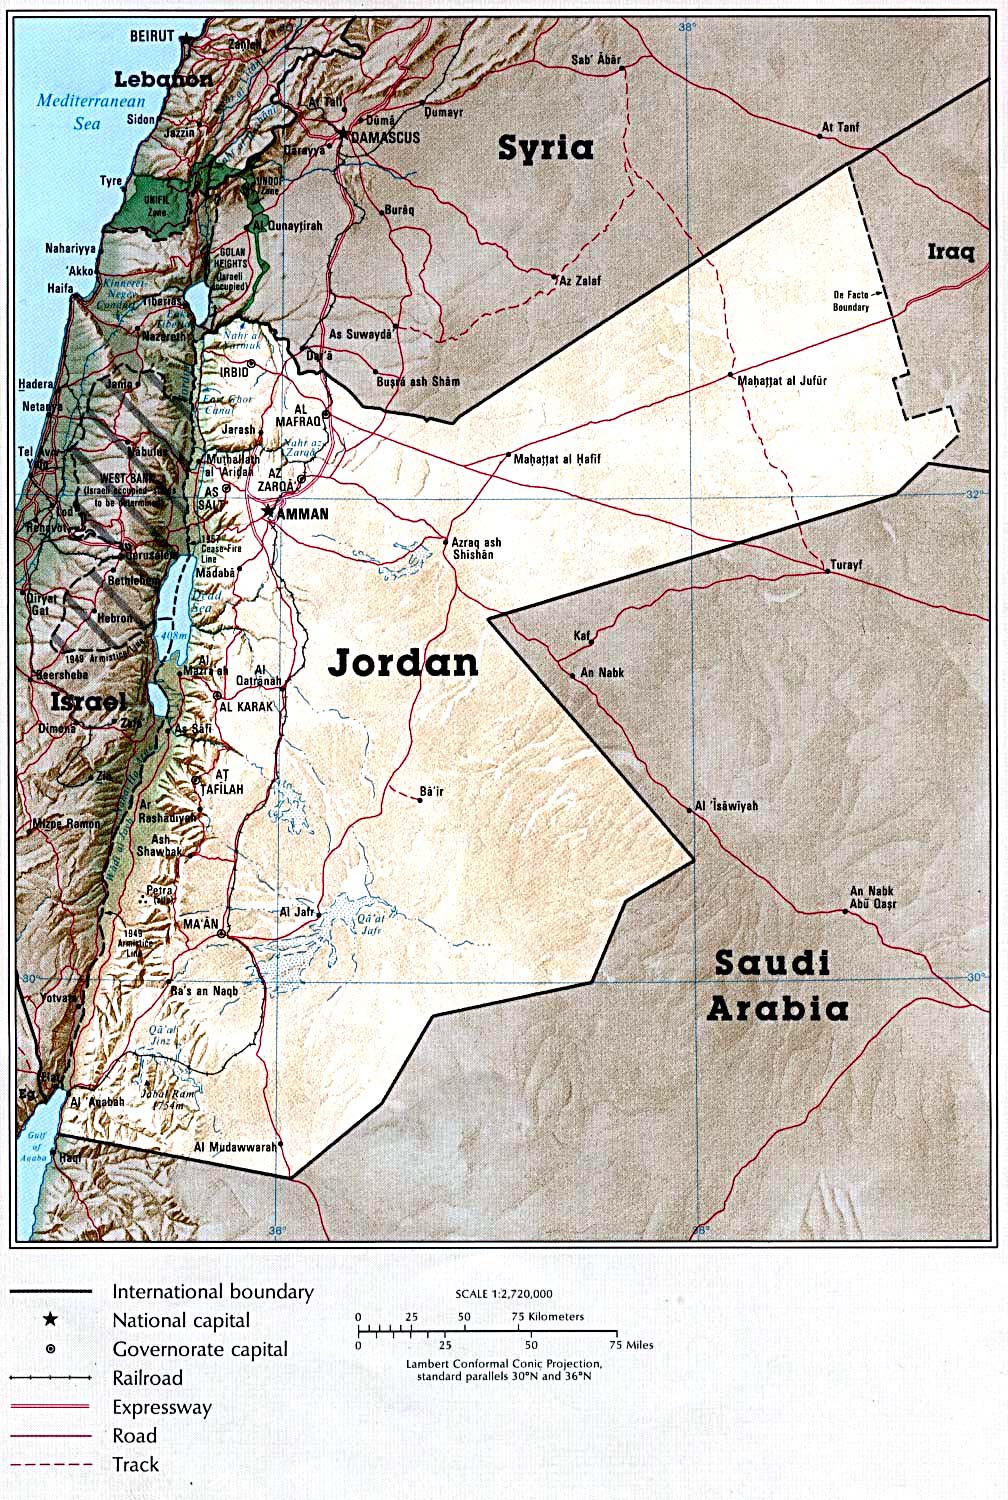 jordan place in which country